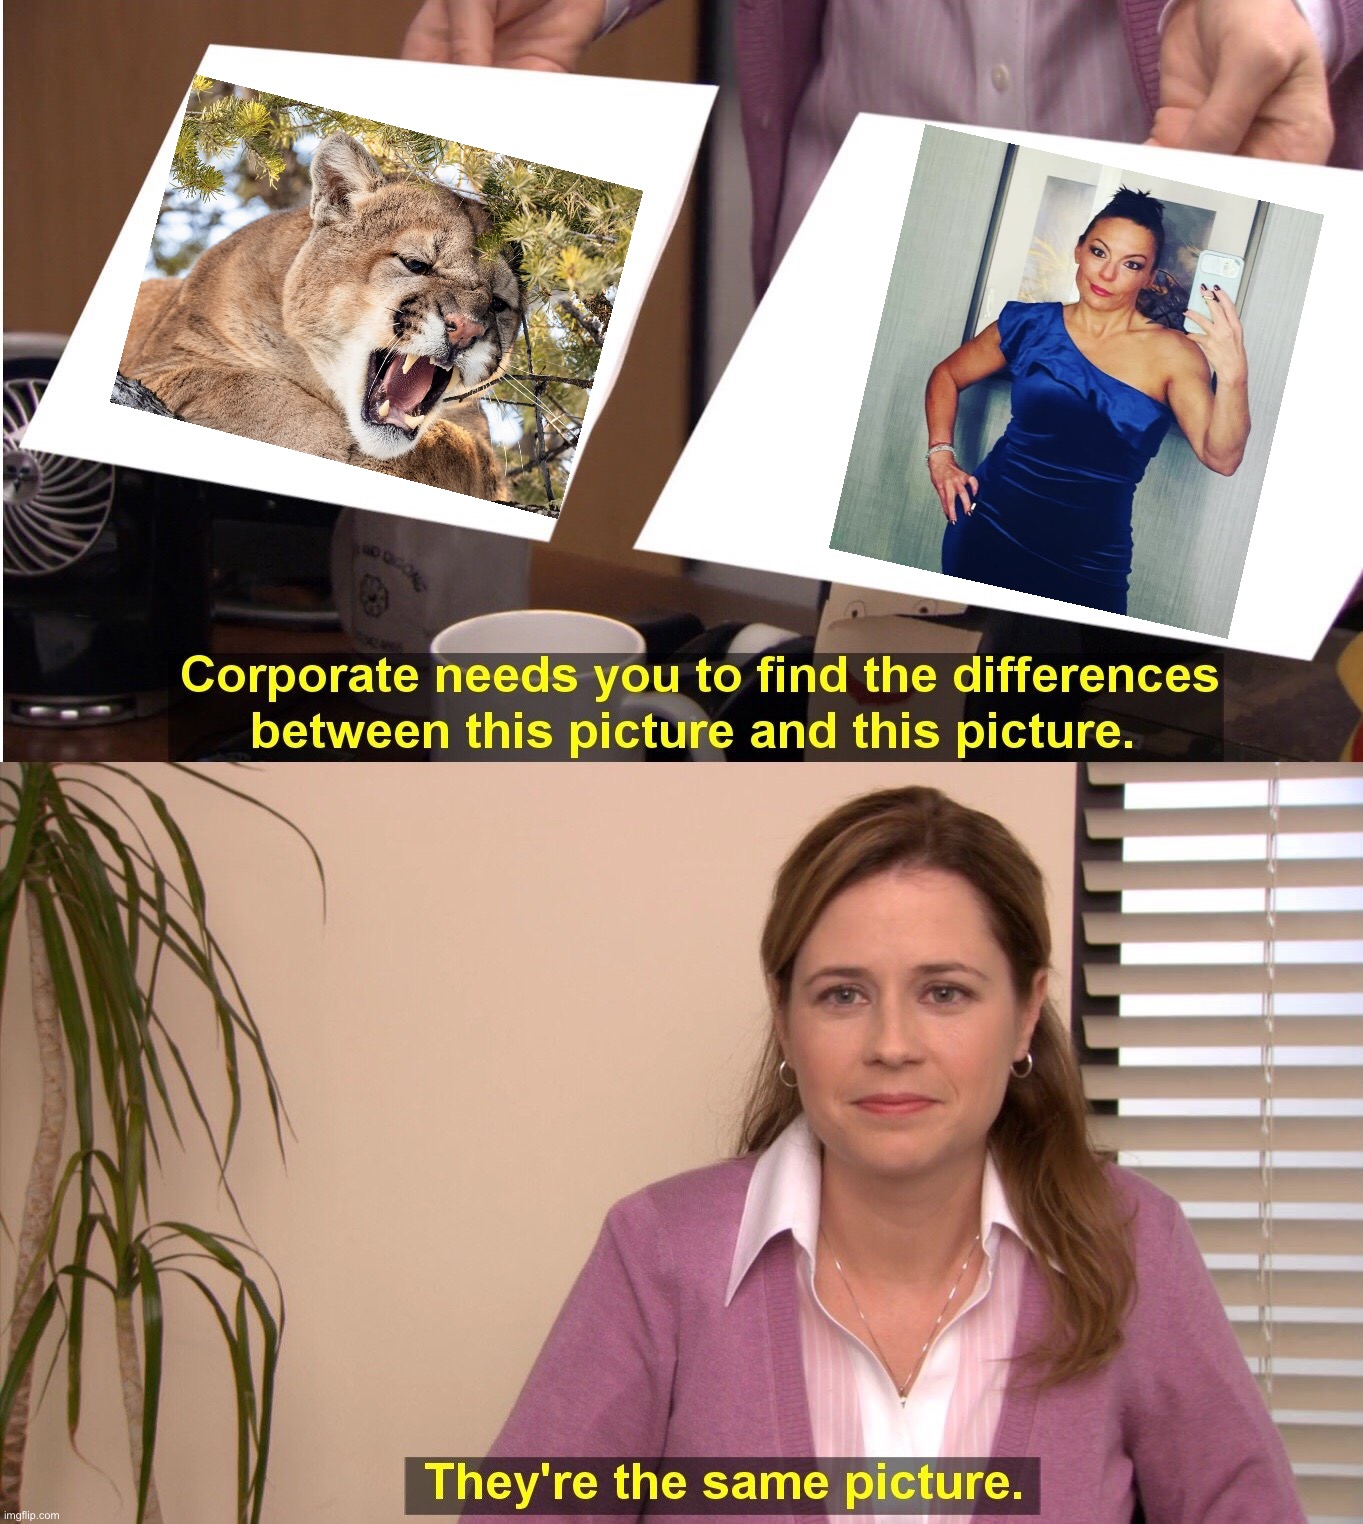 Simple test | image tagged in memes,they're the same picture,the office,wildlife,pam,cougar | made w/ Imgflip meme maker